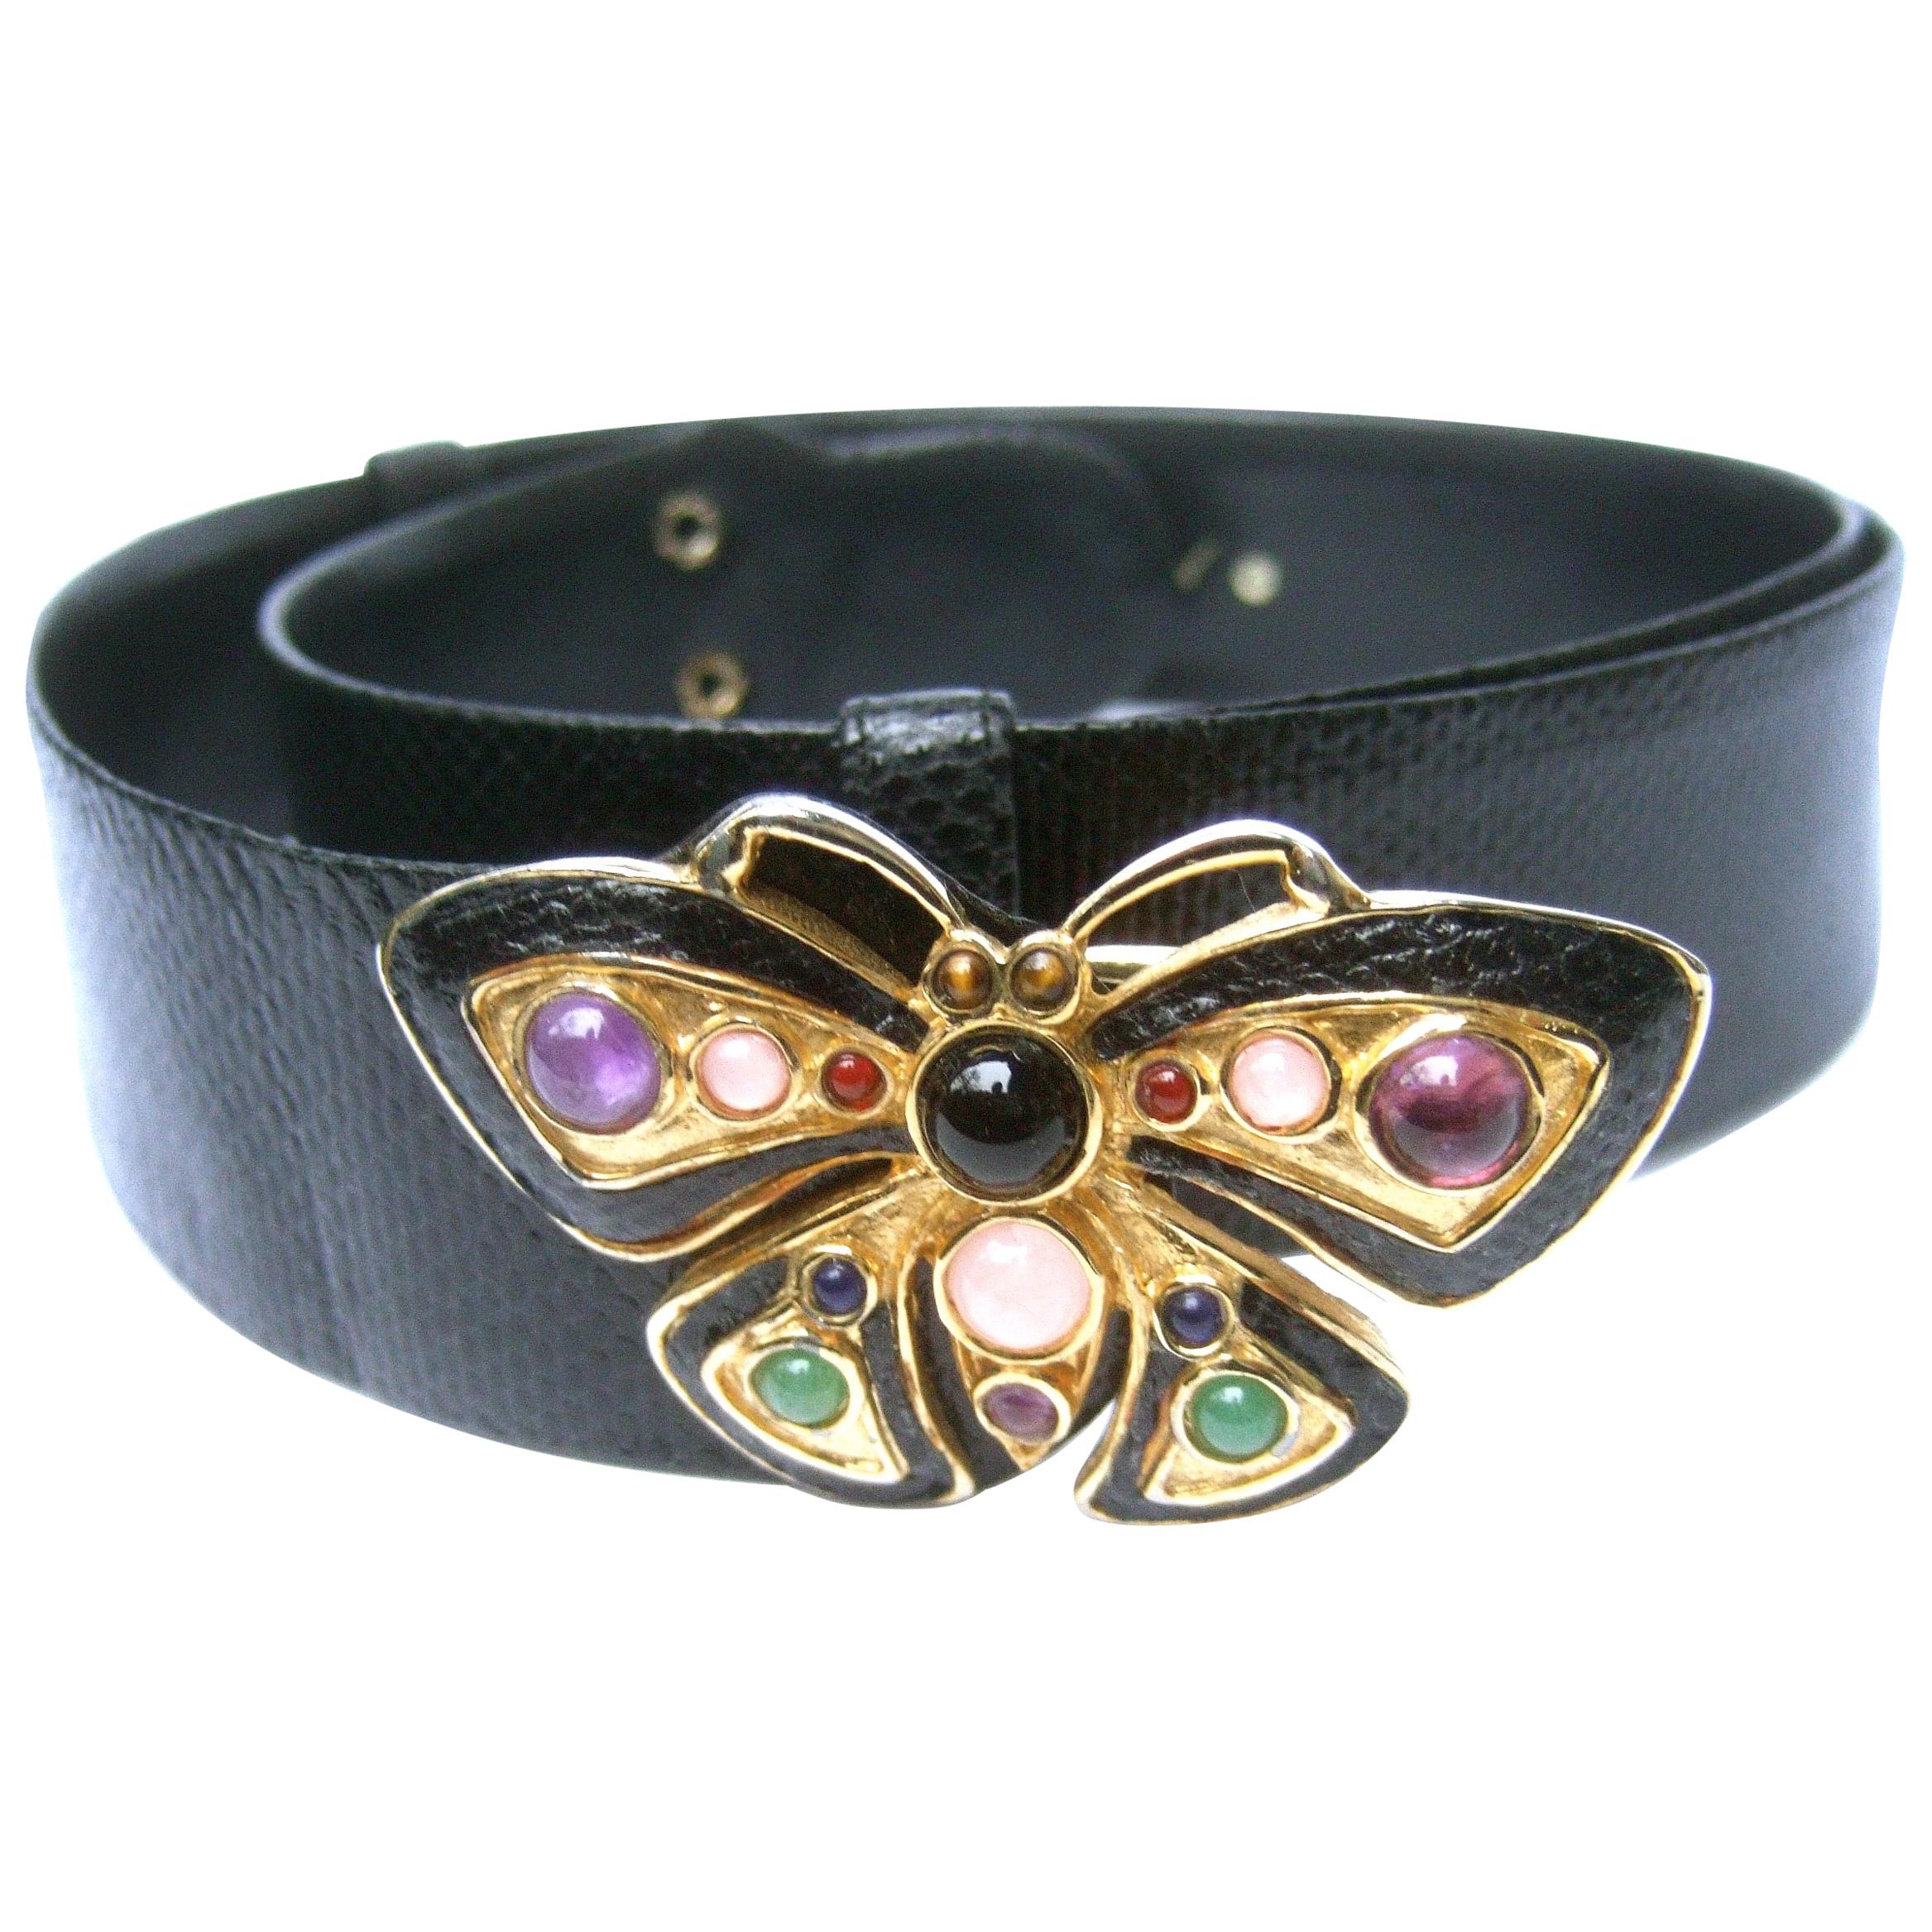 Judith Leiber Jeweled Glass Cabochon Black Leather Butterfly Belt Circa 1980s